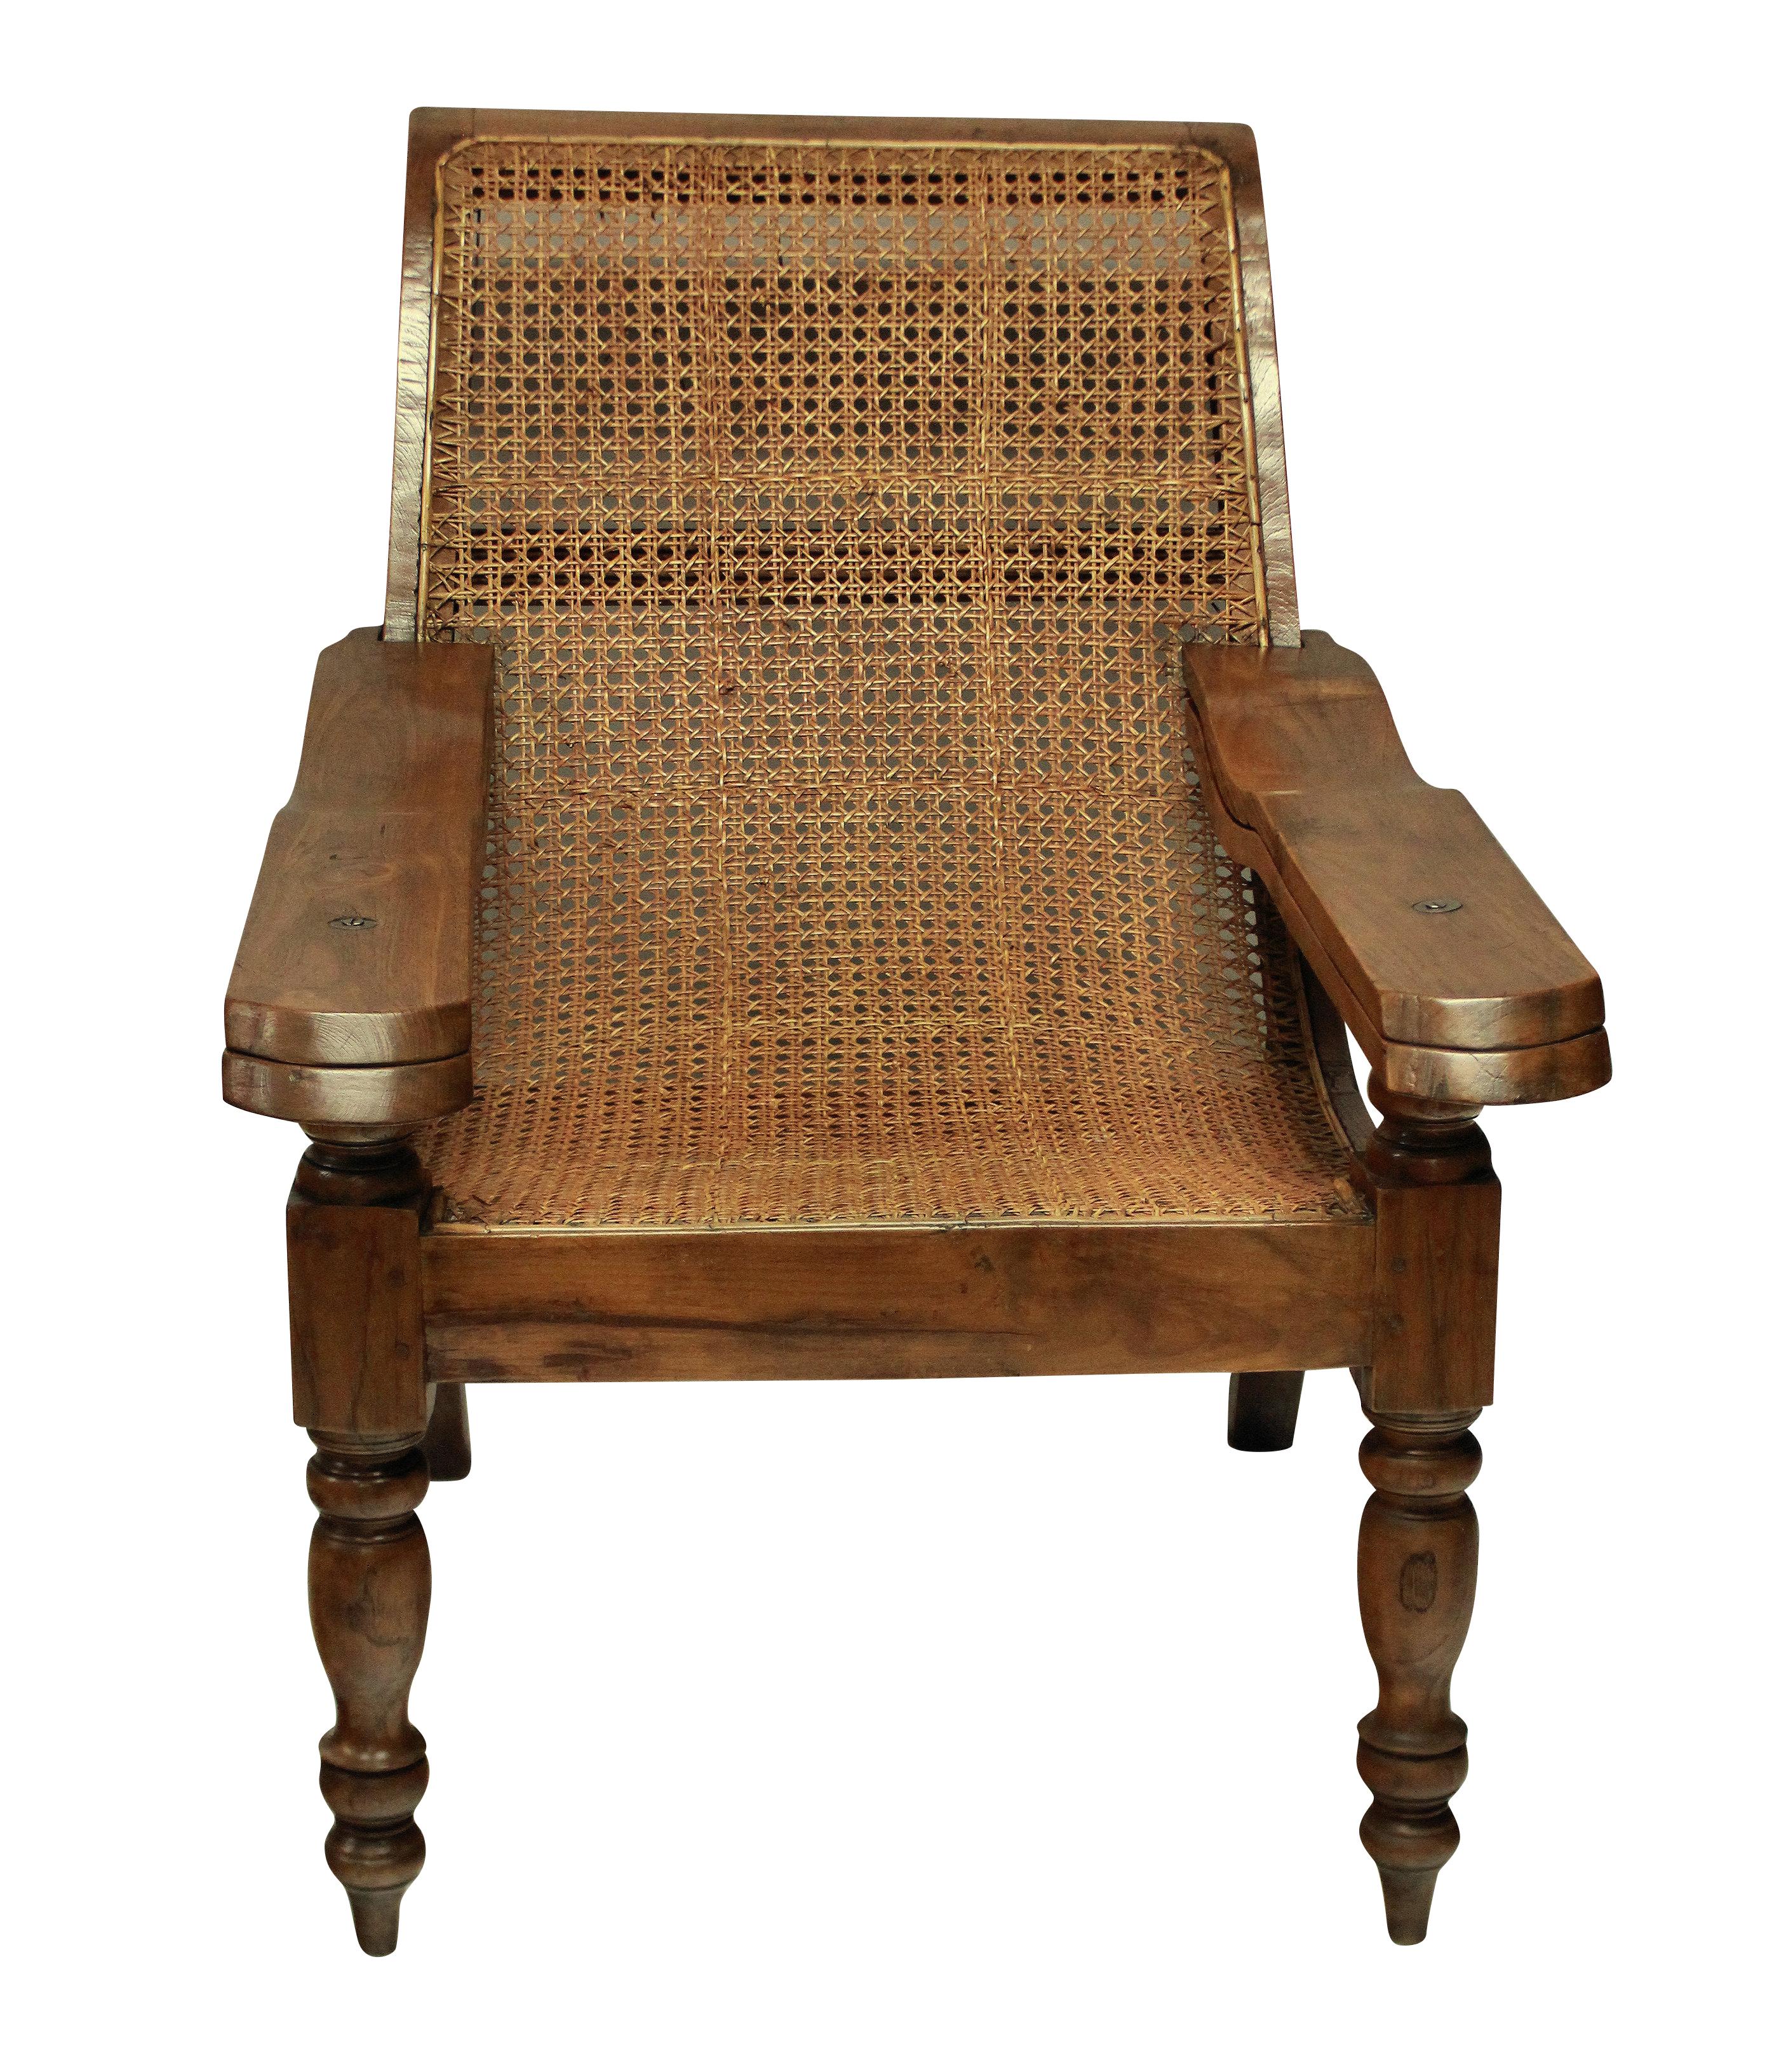 A large colonial, solid teak plantation chair, beautifully restored and with it's original cane work intact. With swing-out leg rests.

Measures: 97cm high (back) x 47cm high (seat) x 72cm wide x 115cm deep x 166cm deep (open).